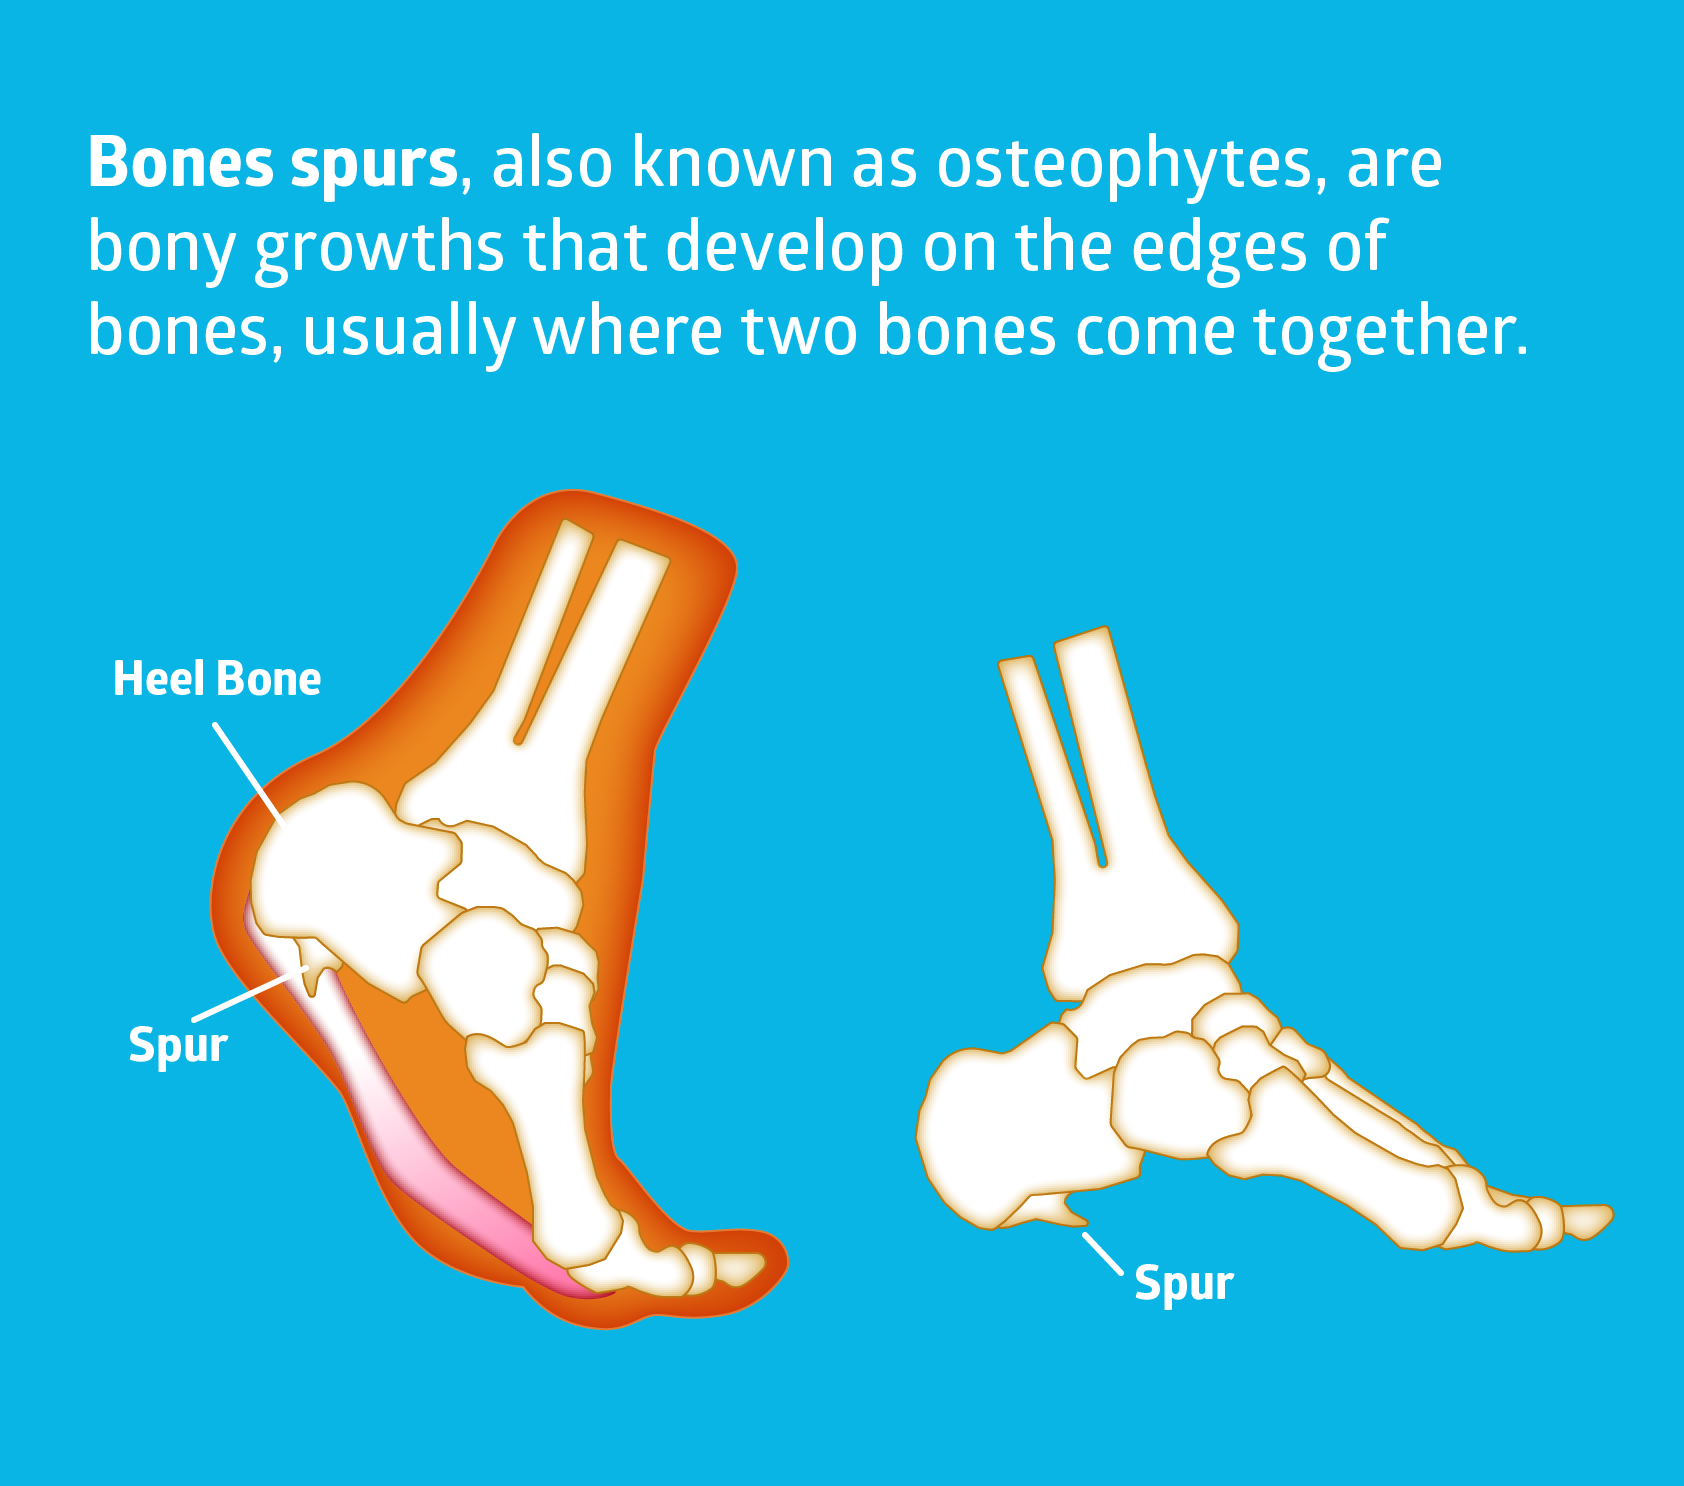 How to Treat Bone Spurs The Natural Way